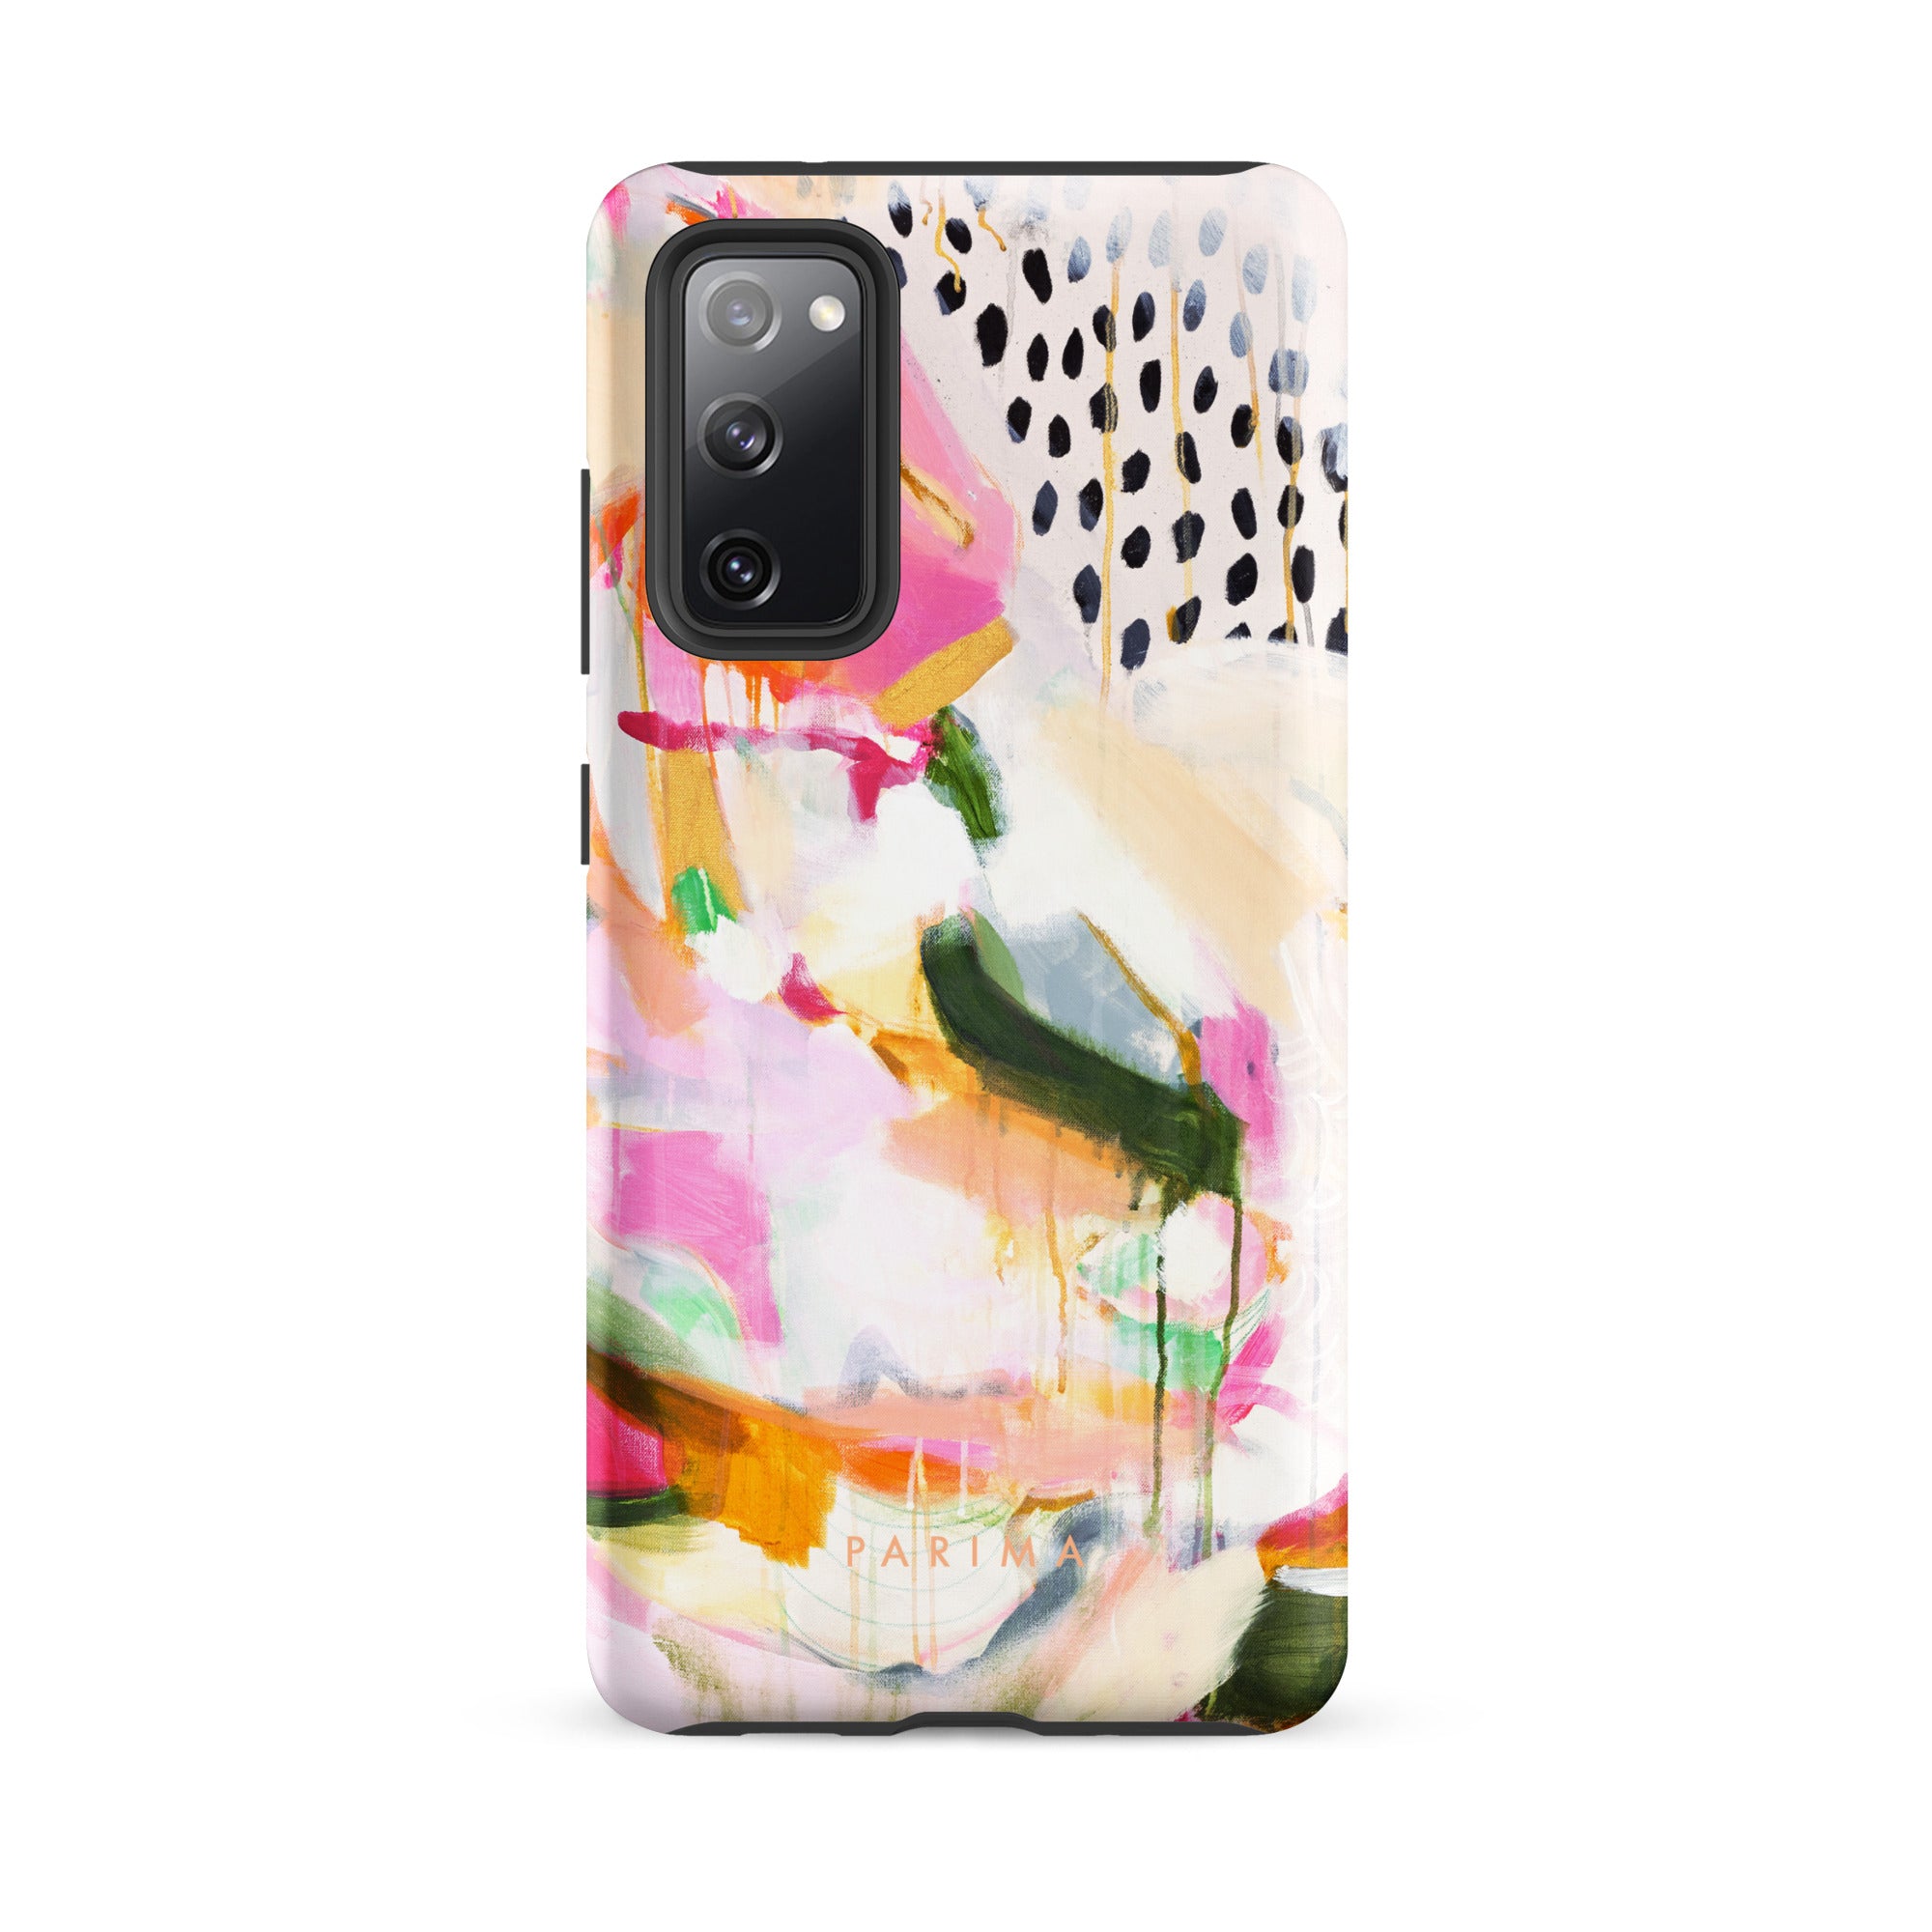 Adira, pink and green abstract art on Samsung Galaxy S20 FE tough case by Parima Studio